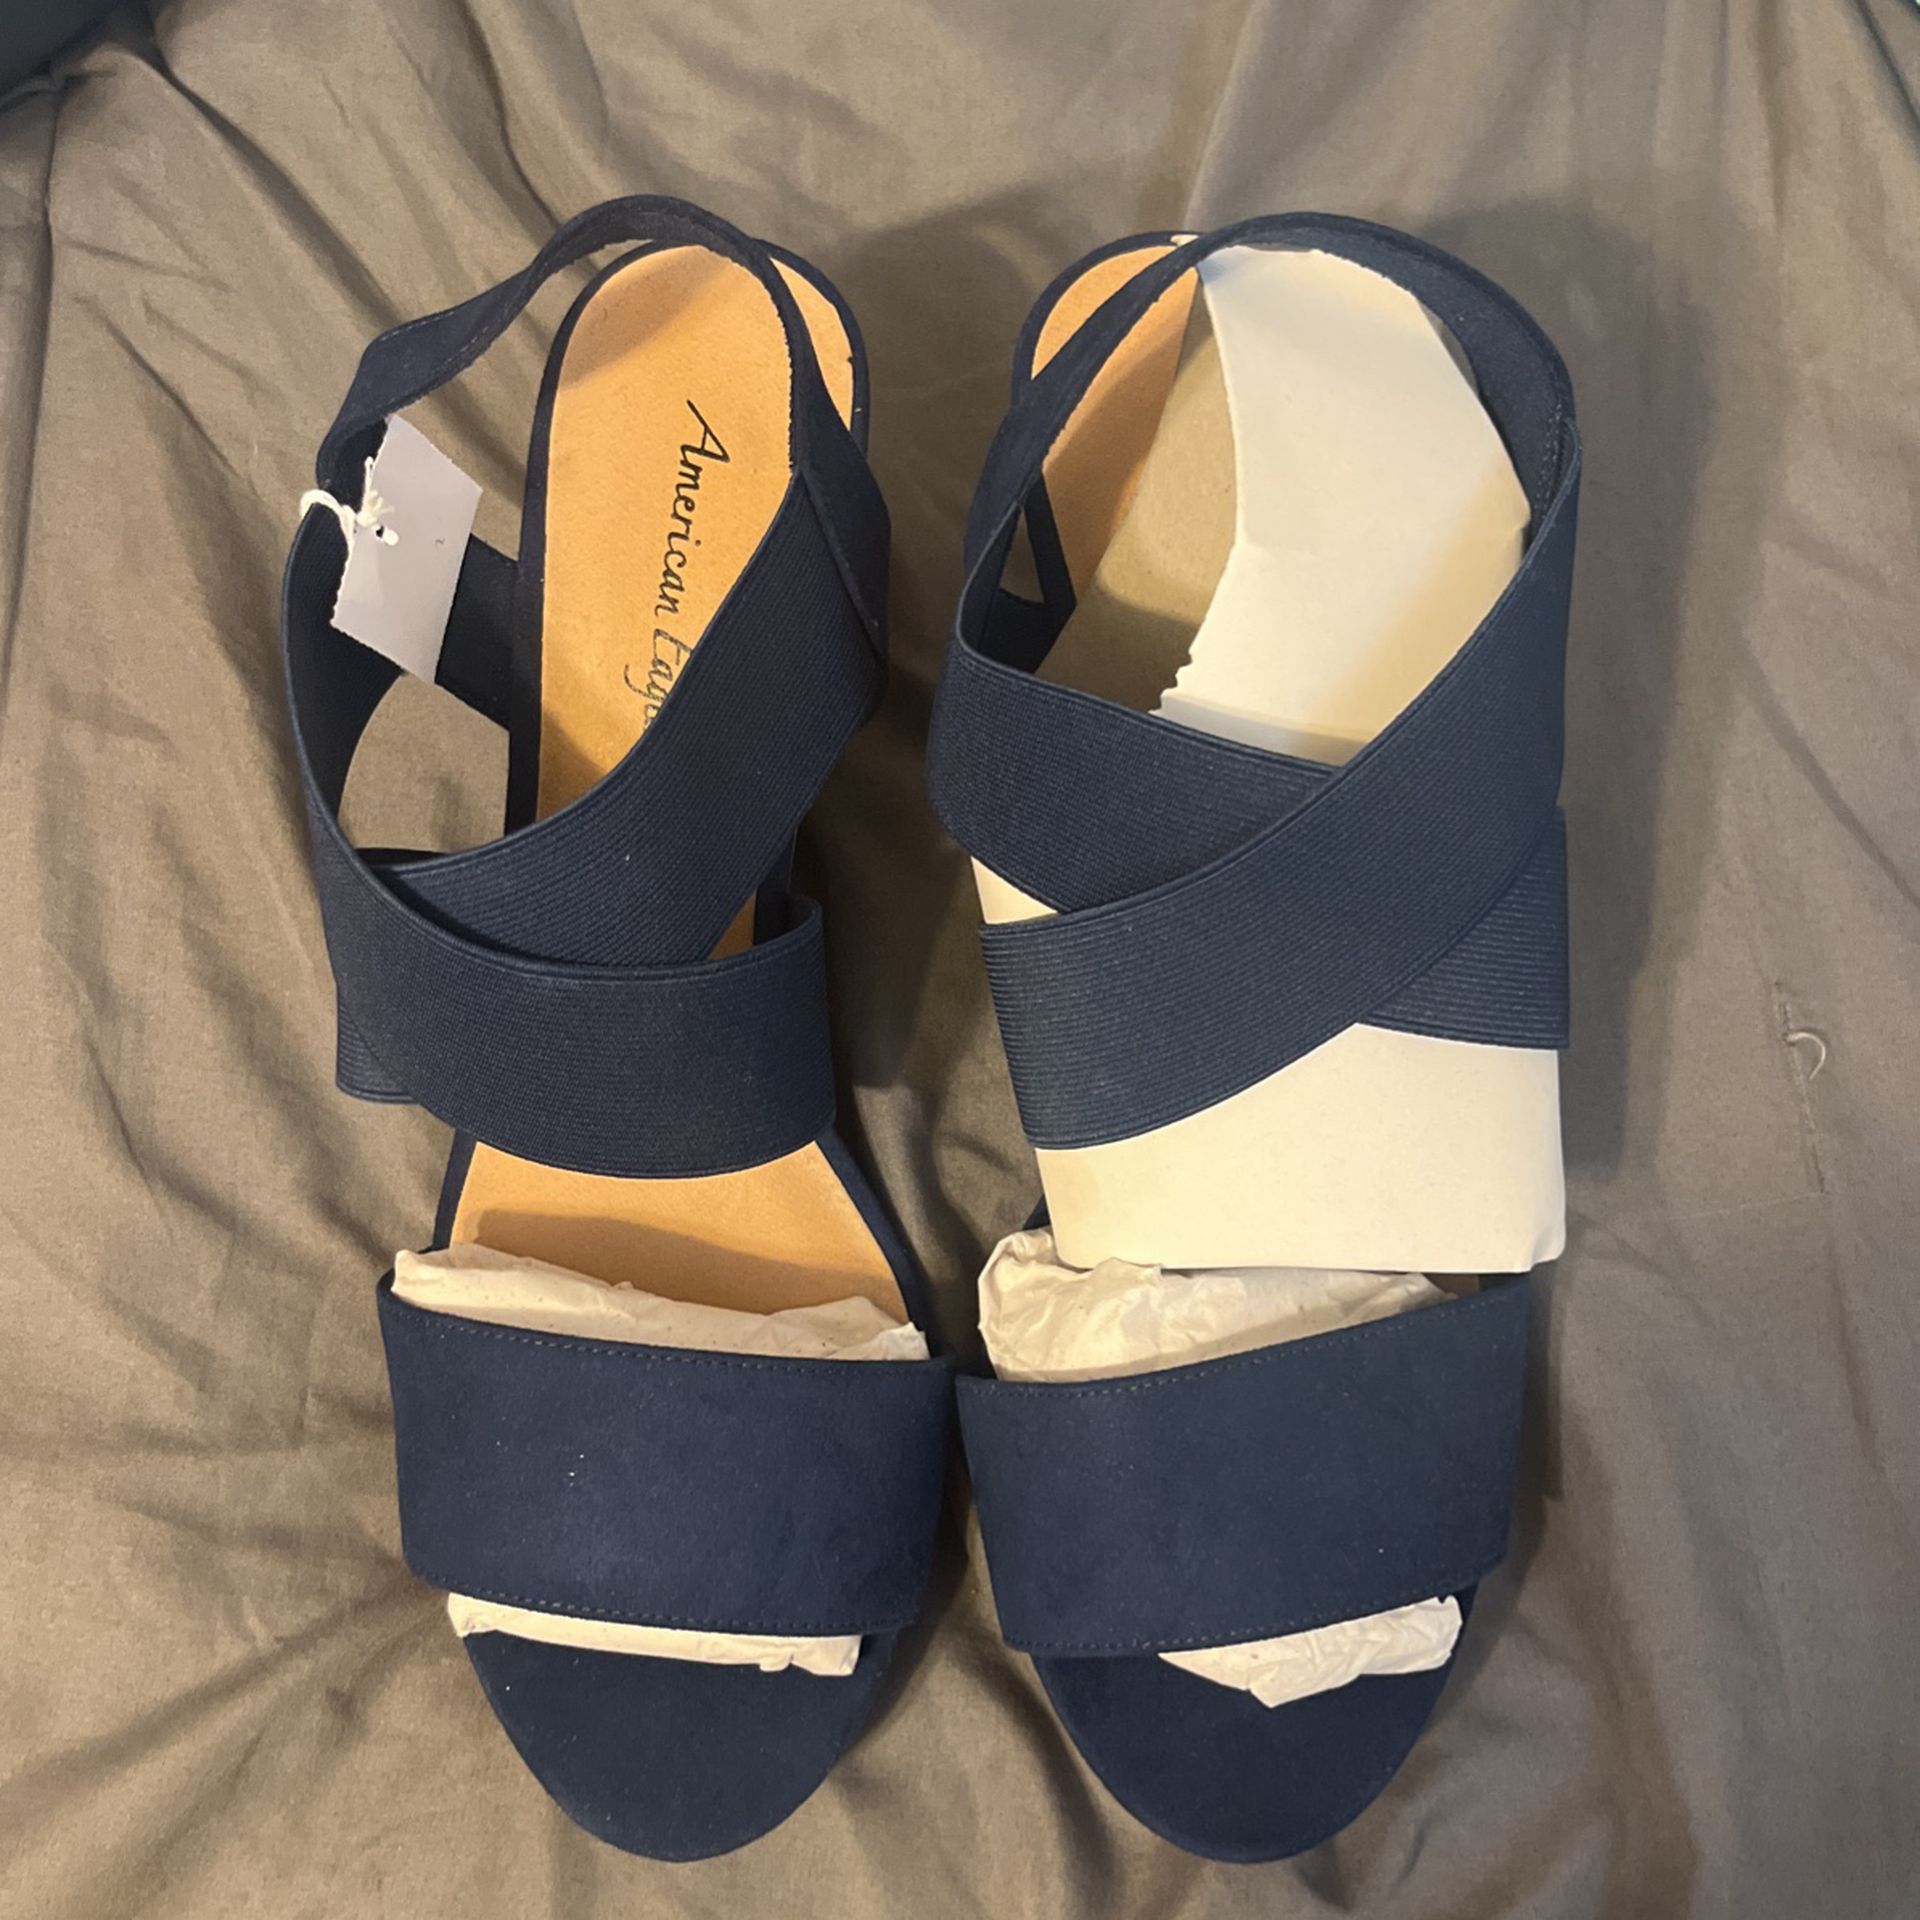 Women’s Size 13 American Eagle Wedges